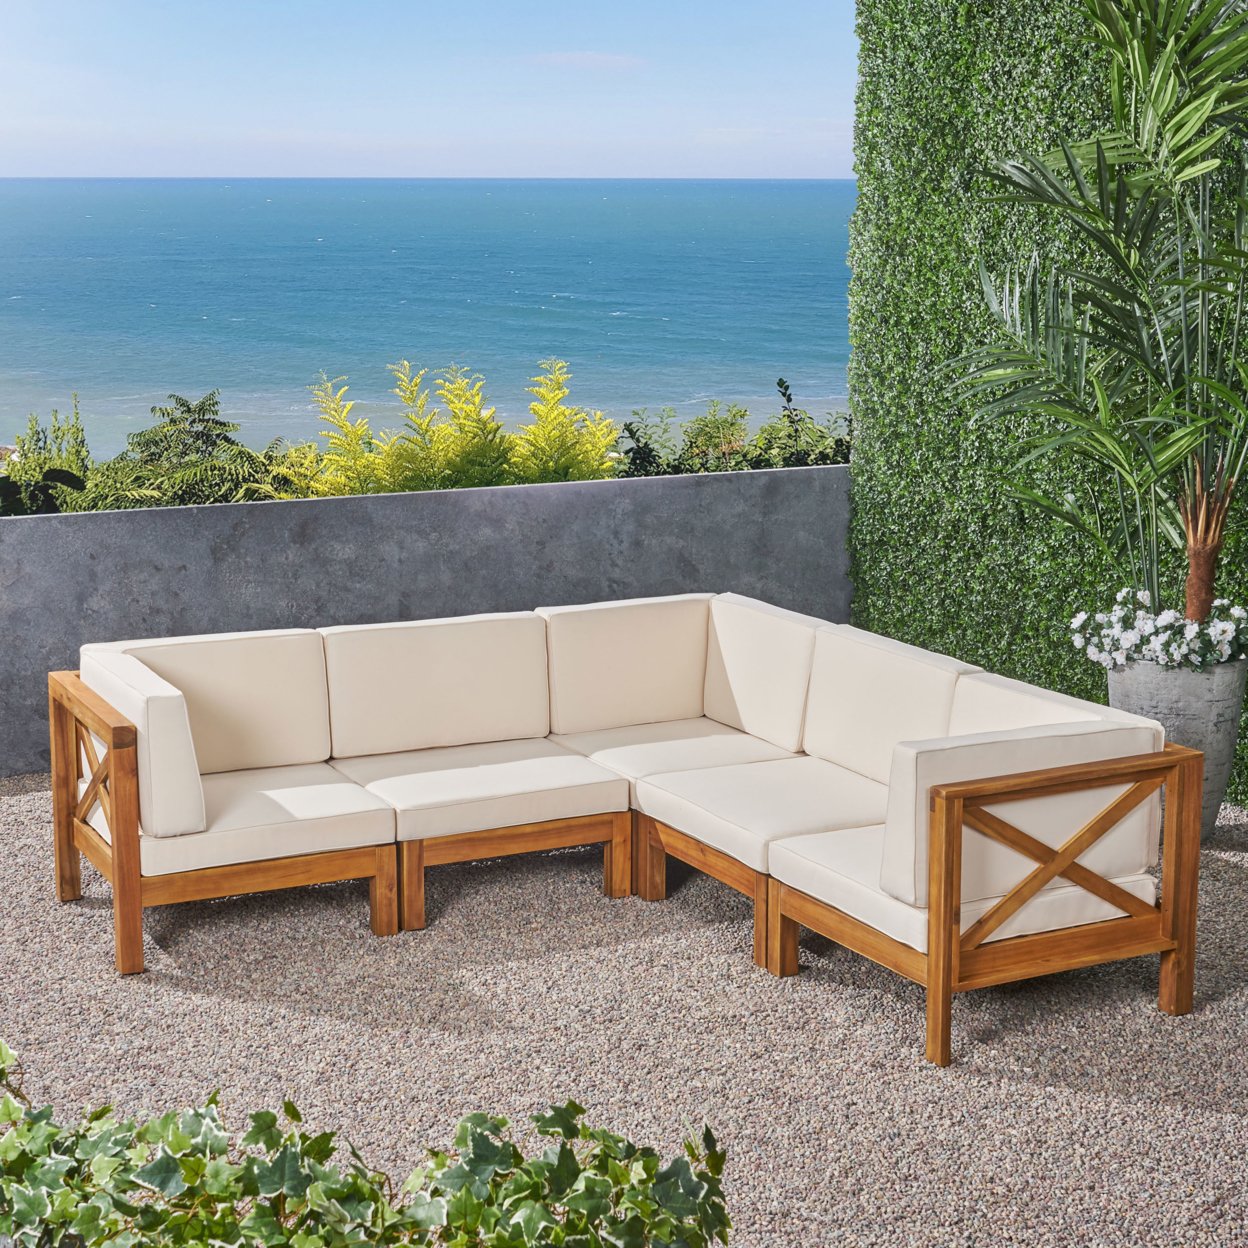 Brava Outdoor Acacia Wood 5 Seater Sectional Sofa Set With Water-Resistant Cushions - Teak Finish + Beige